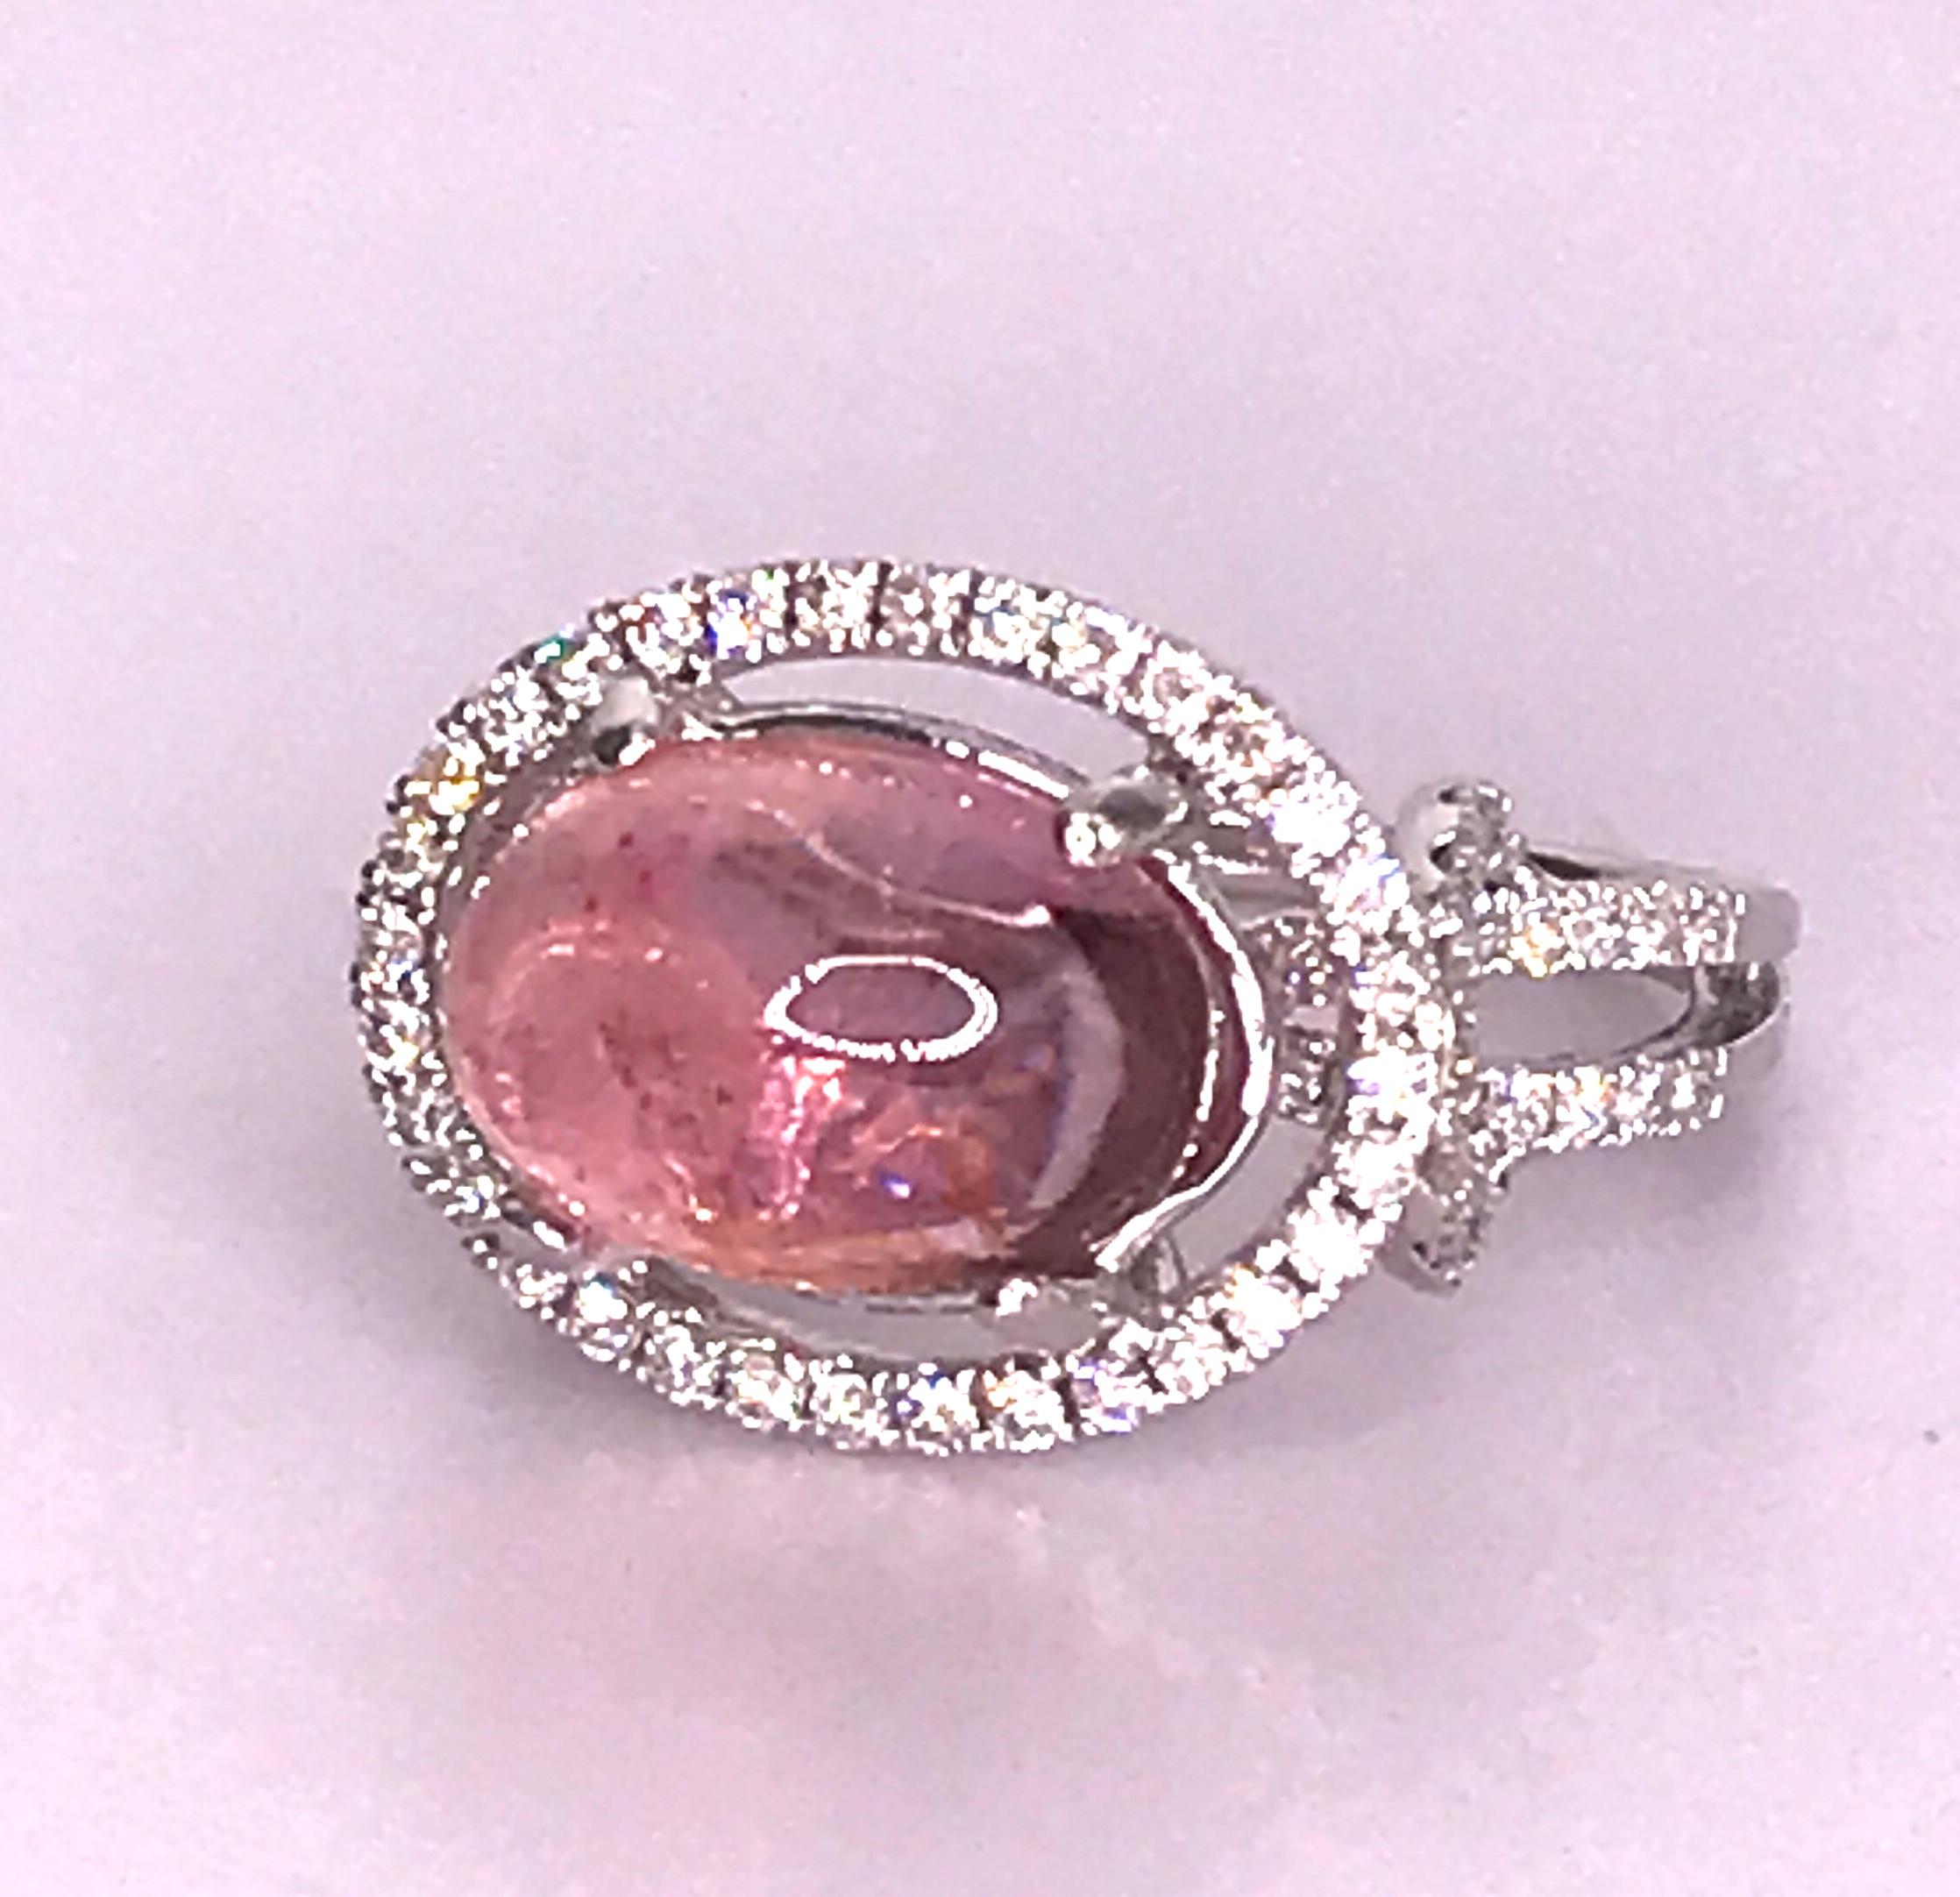 5.9 Carat Pink Tourmaline Cabochon and Diamond Ring For Sale 1